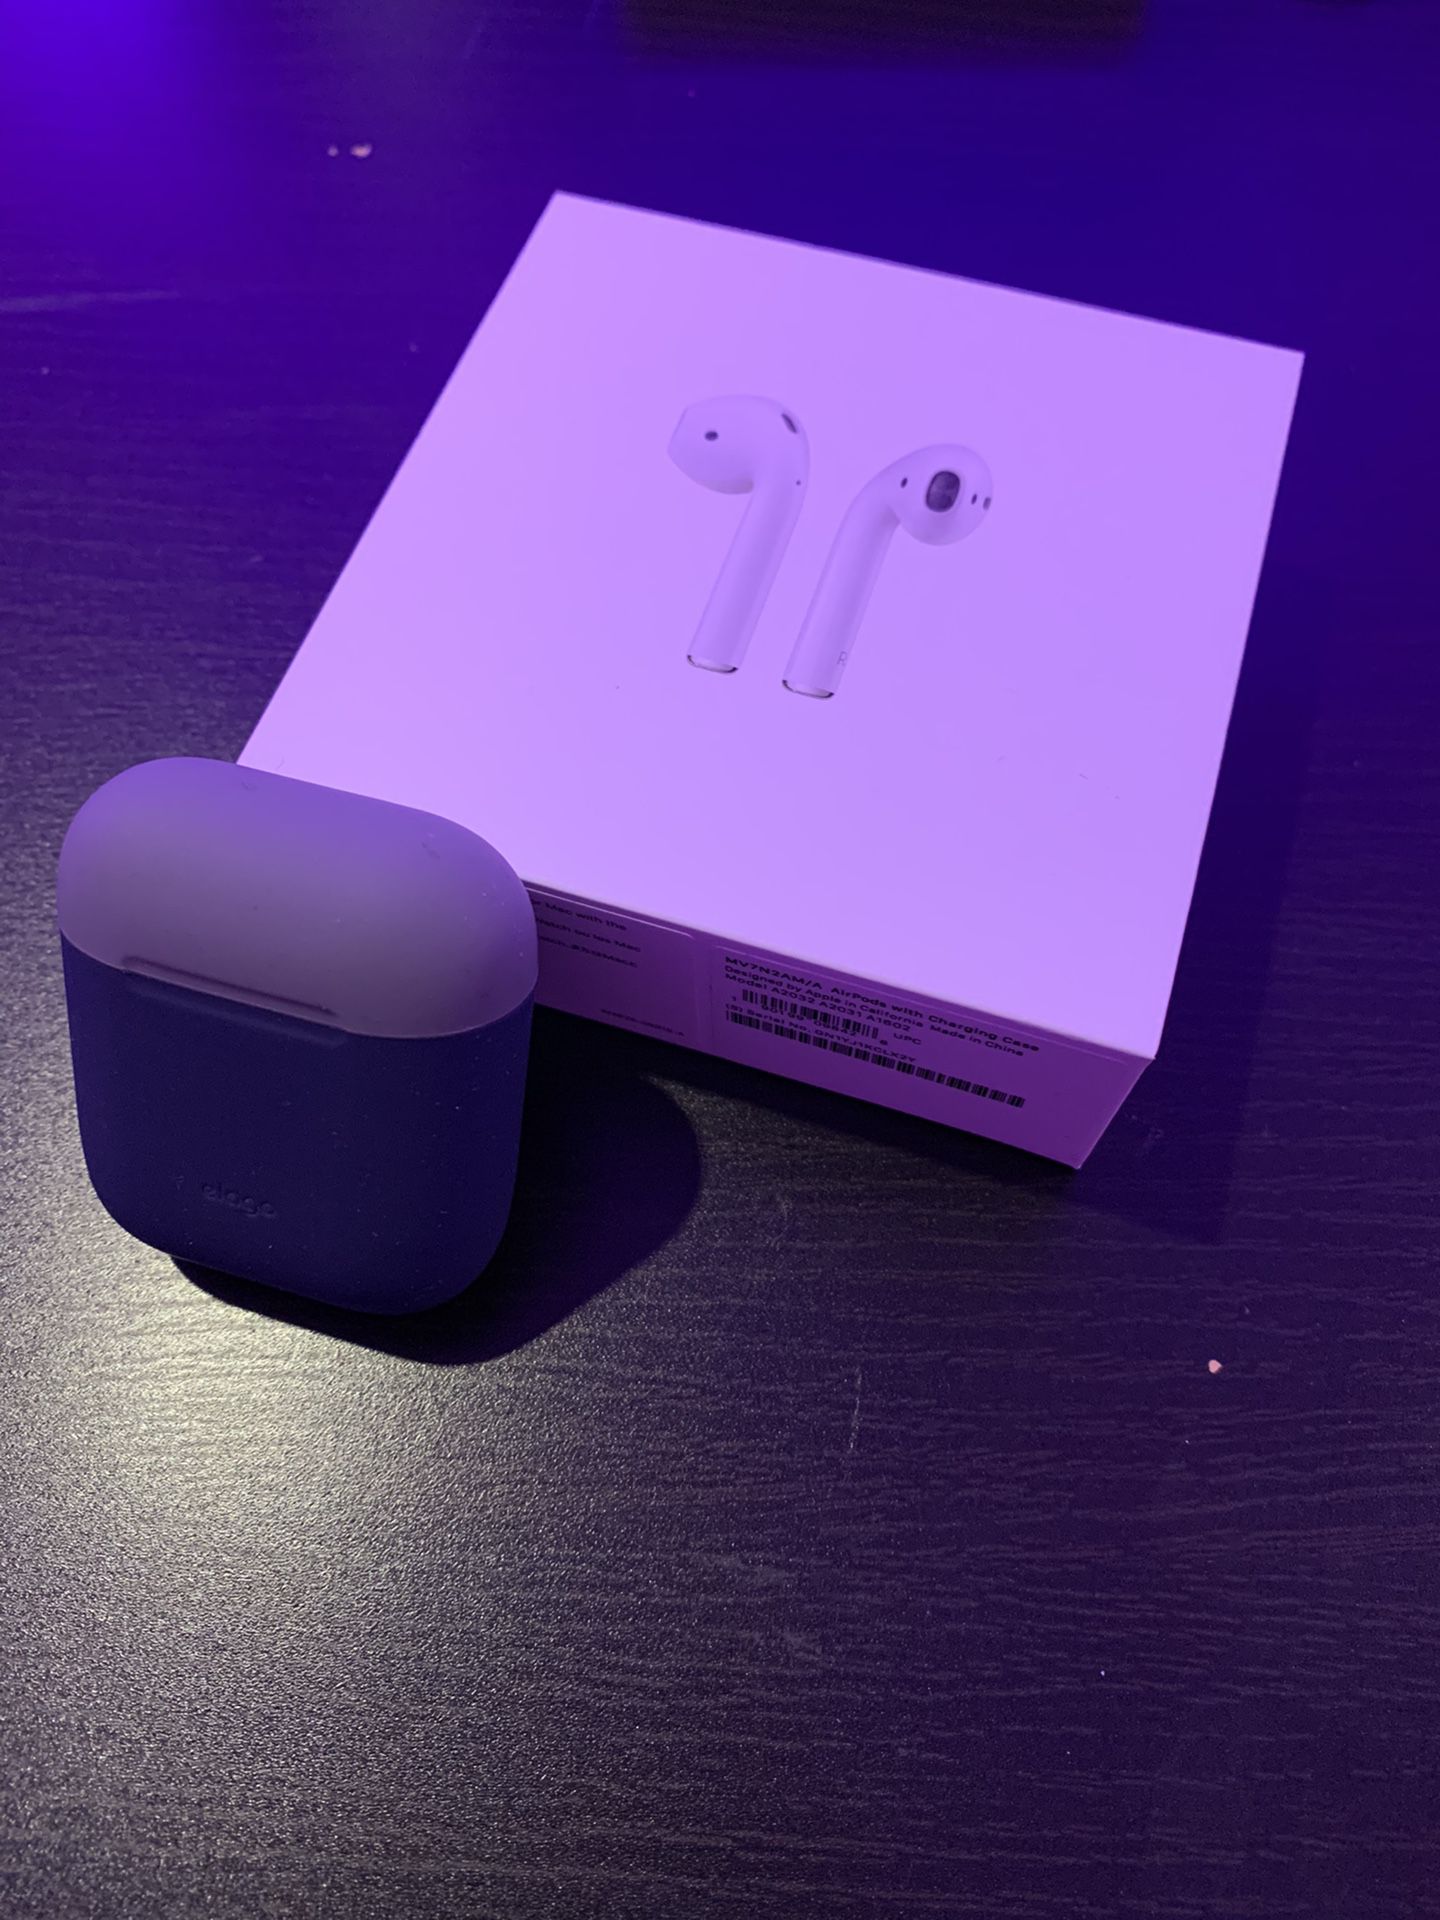 Apple AirPods 2nd gen (current generation)